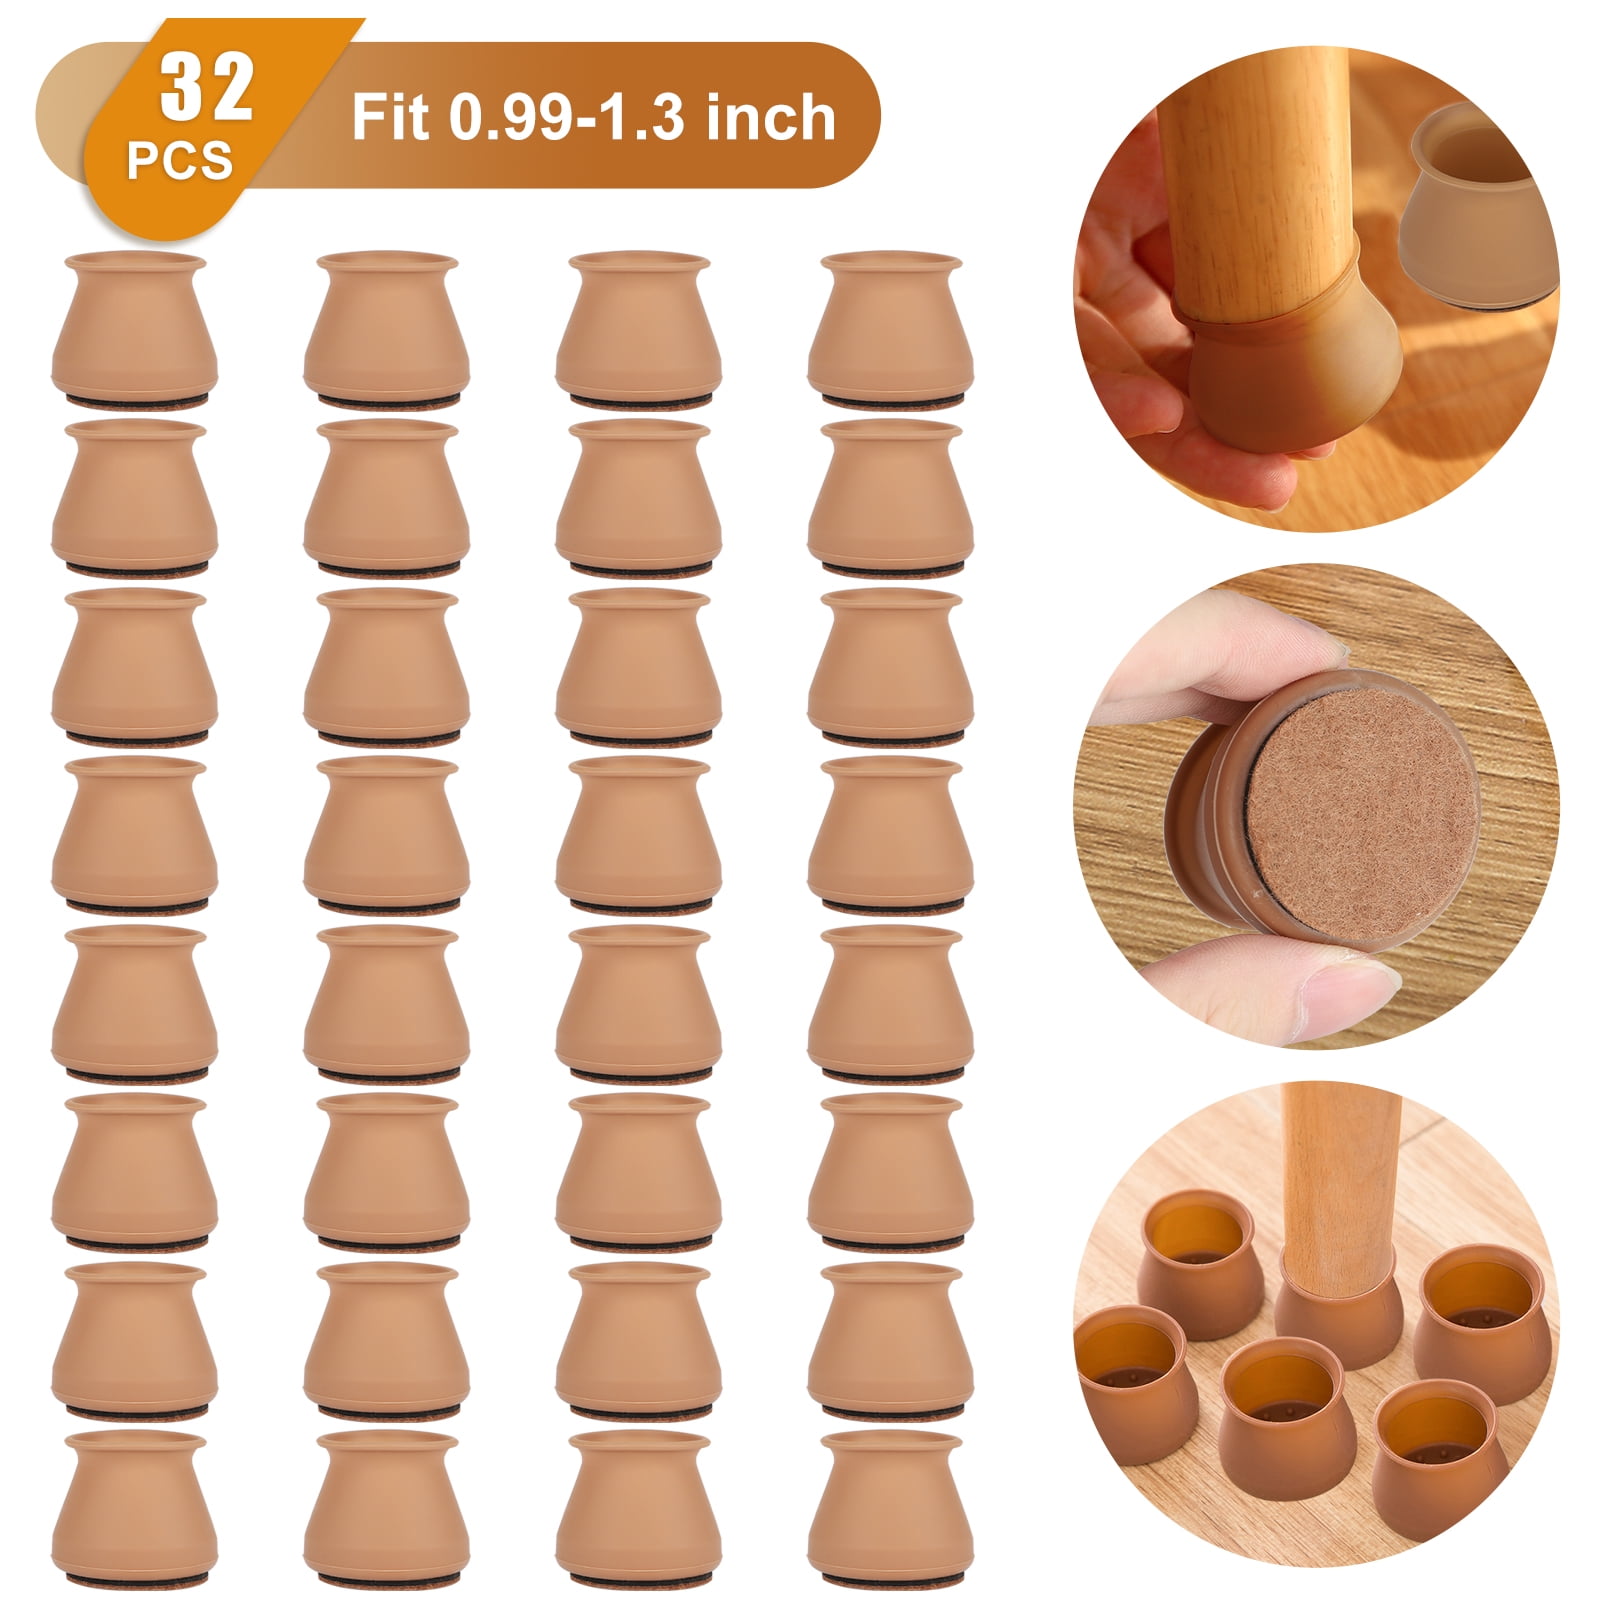 Chair Leg Caps for Protecting Floors from Scratches and Noise 16 Pcs Chair Leg Floor Protectors Chair Leg Protectors Chair Feet Protectors Transparency Stool Leg Protection Caps Brown Transparent Black Transparent